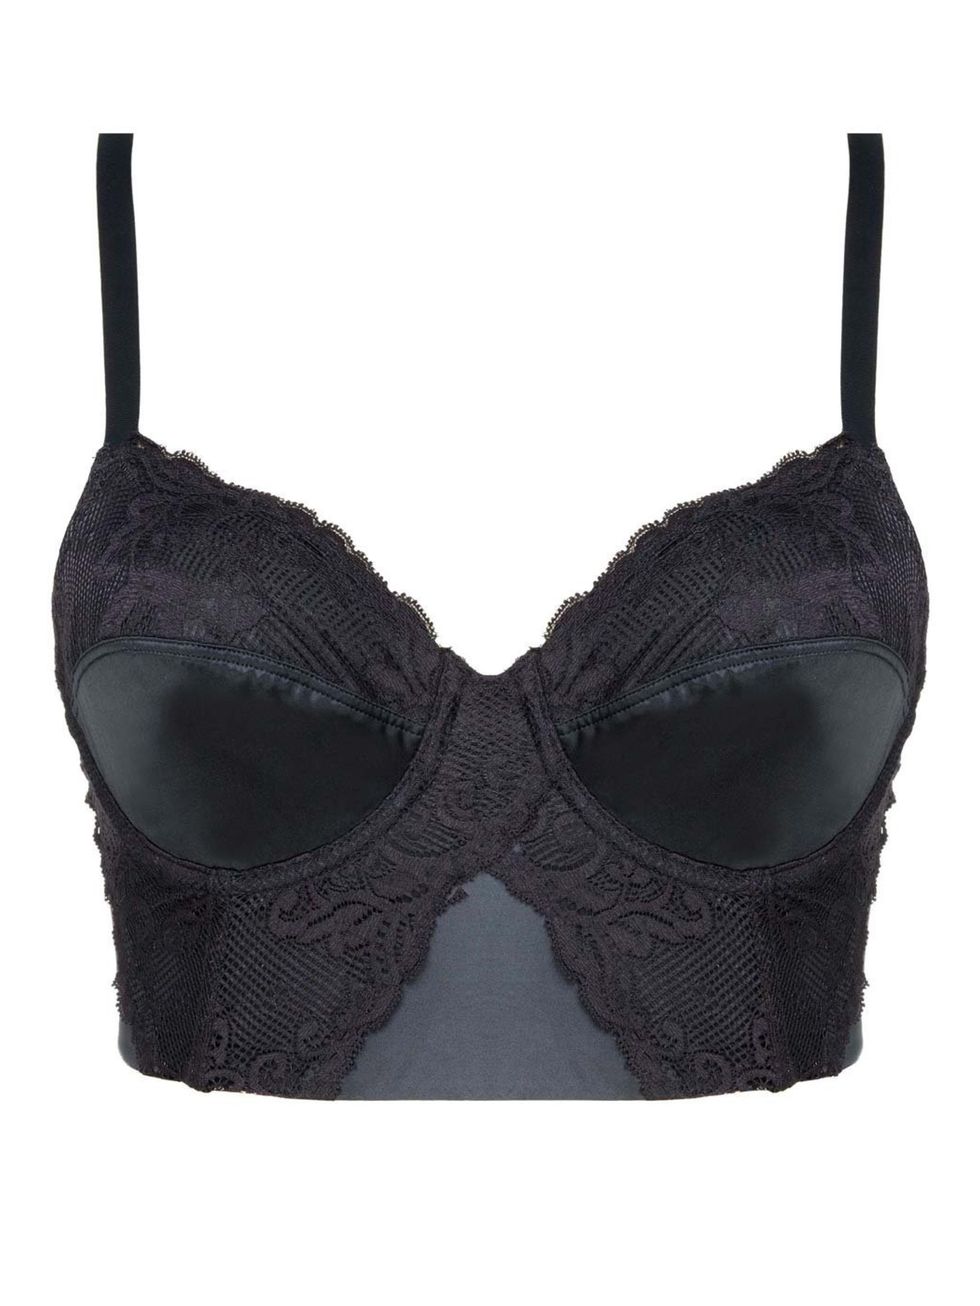 <p>Maidenform 90th anniversary capsule collection extended bra</p>